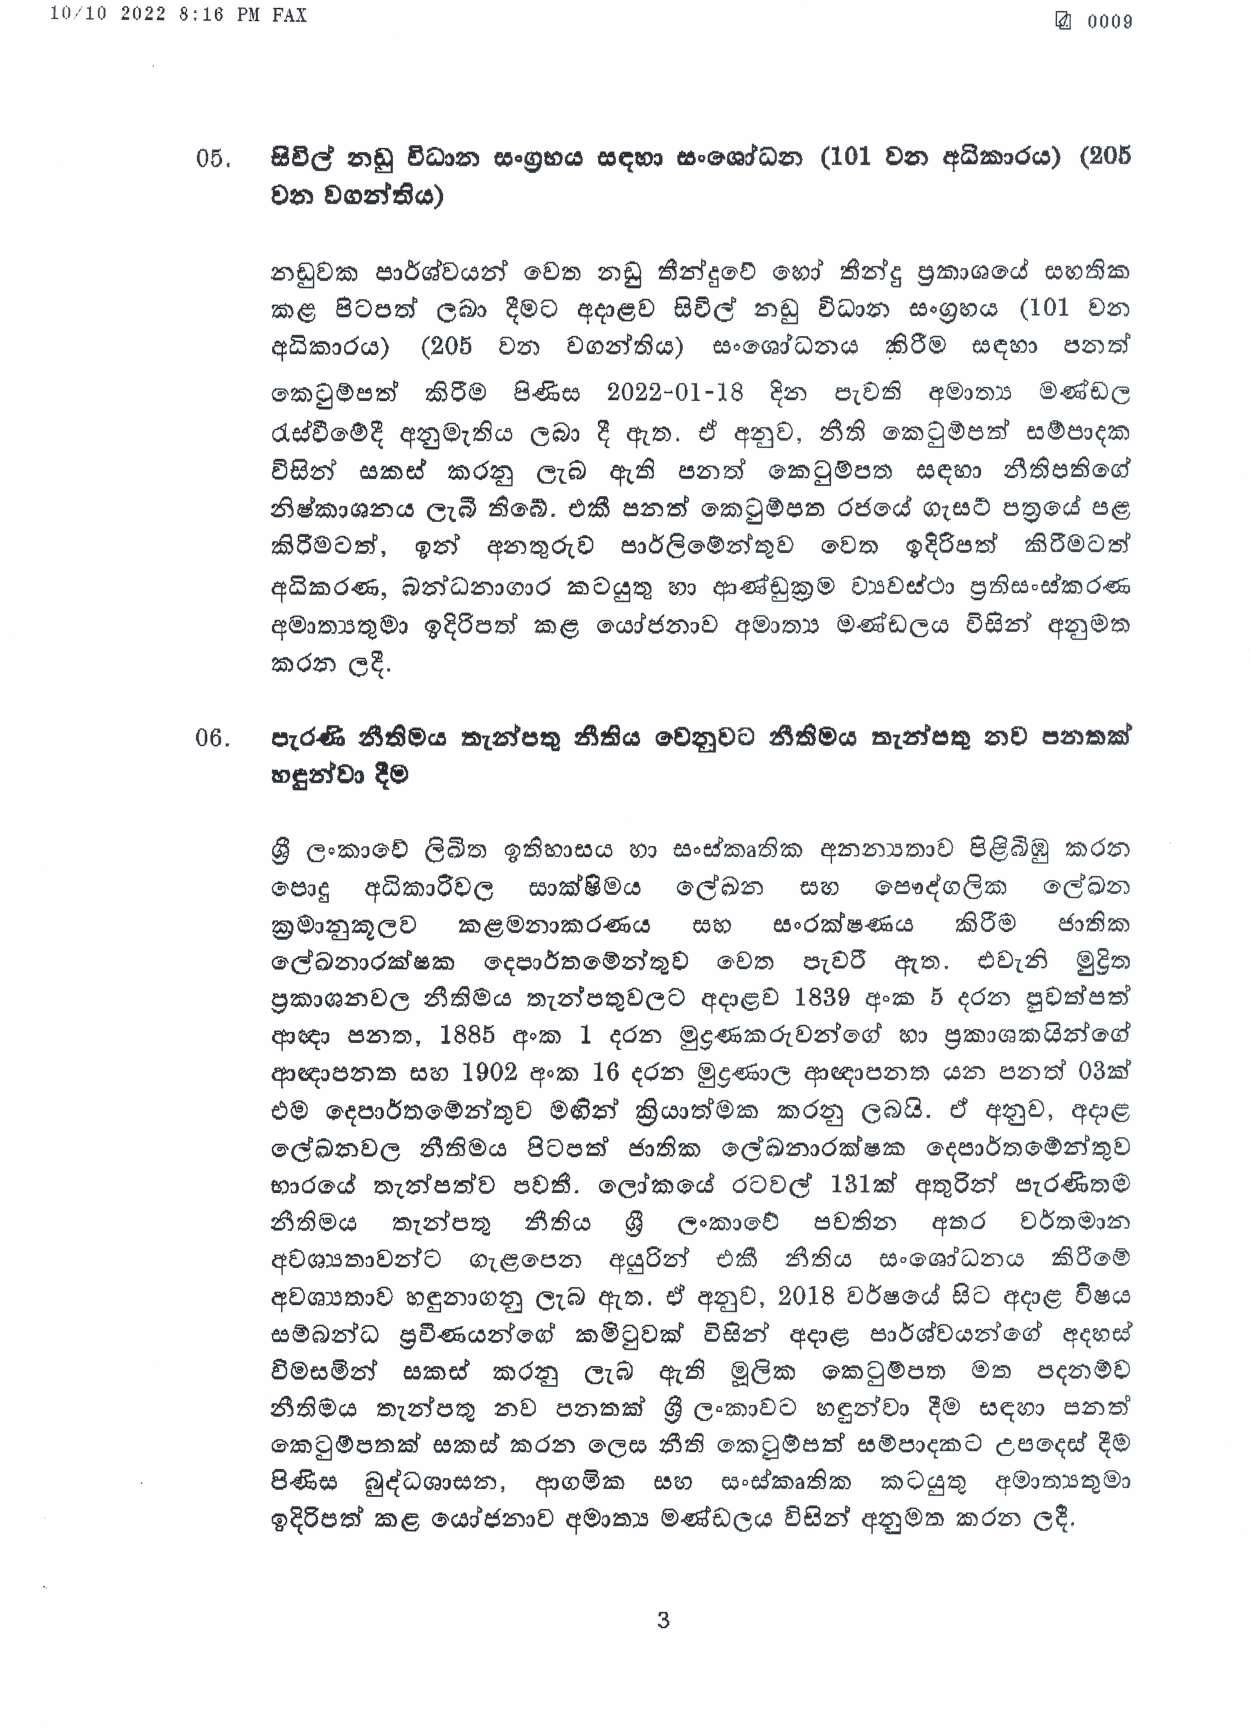 Cabinet Decision on 10.10.2022 page 003